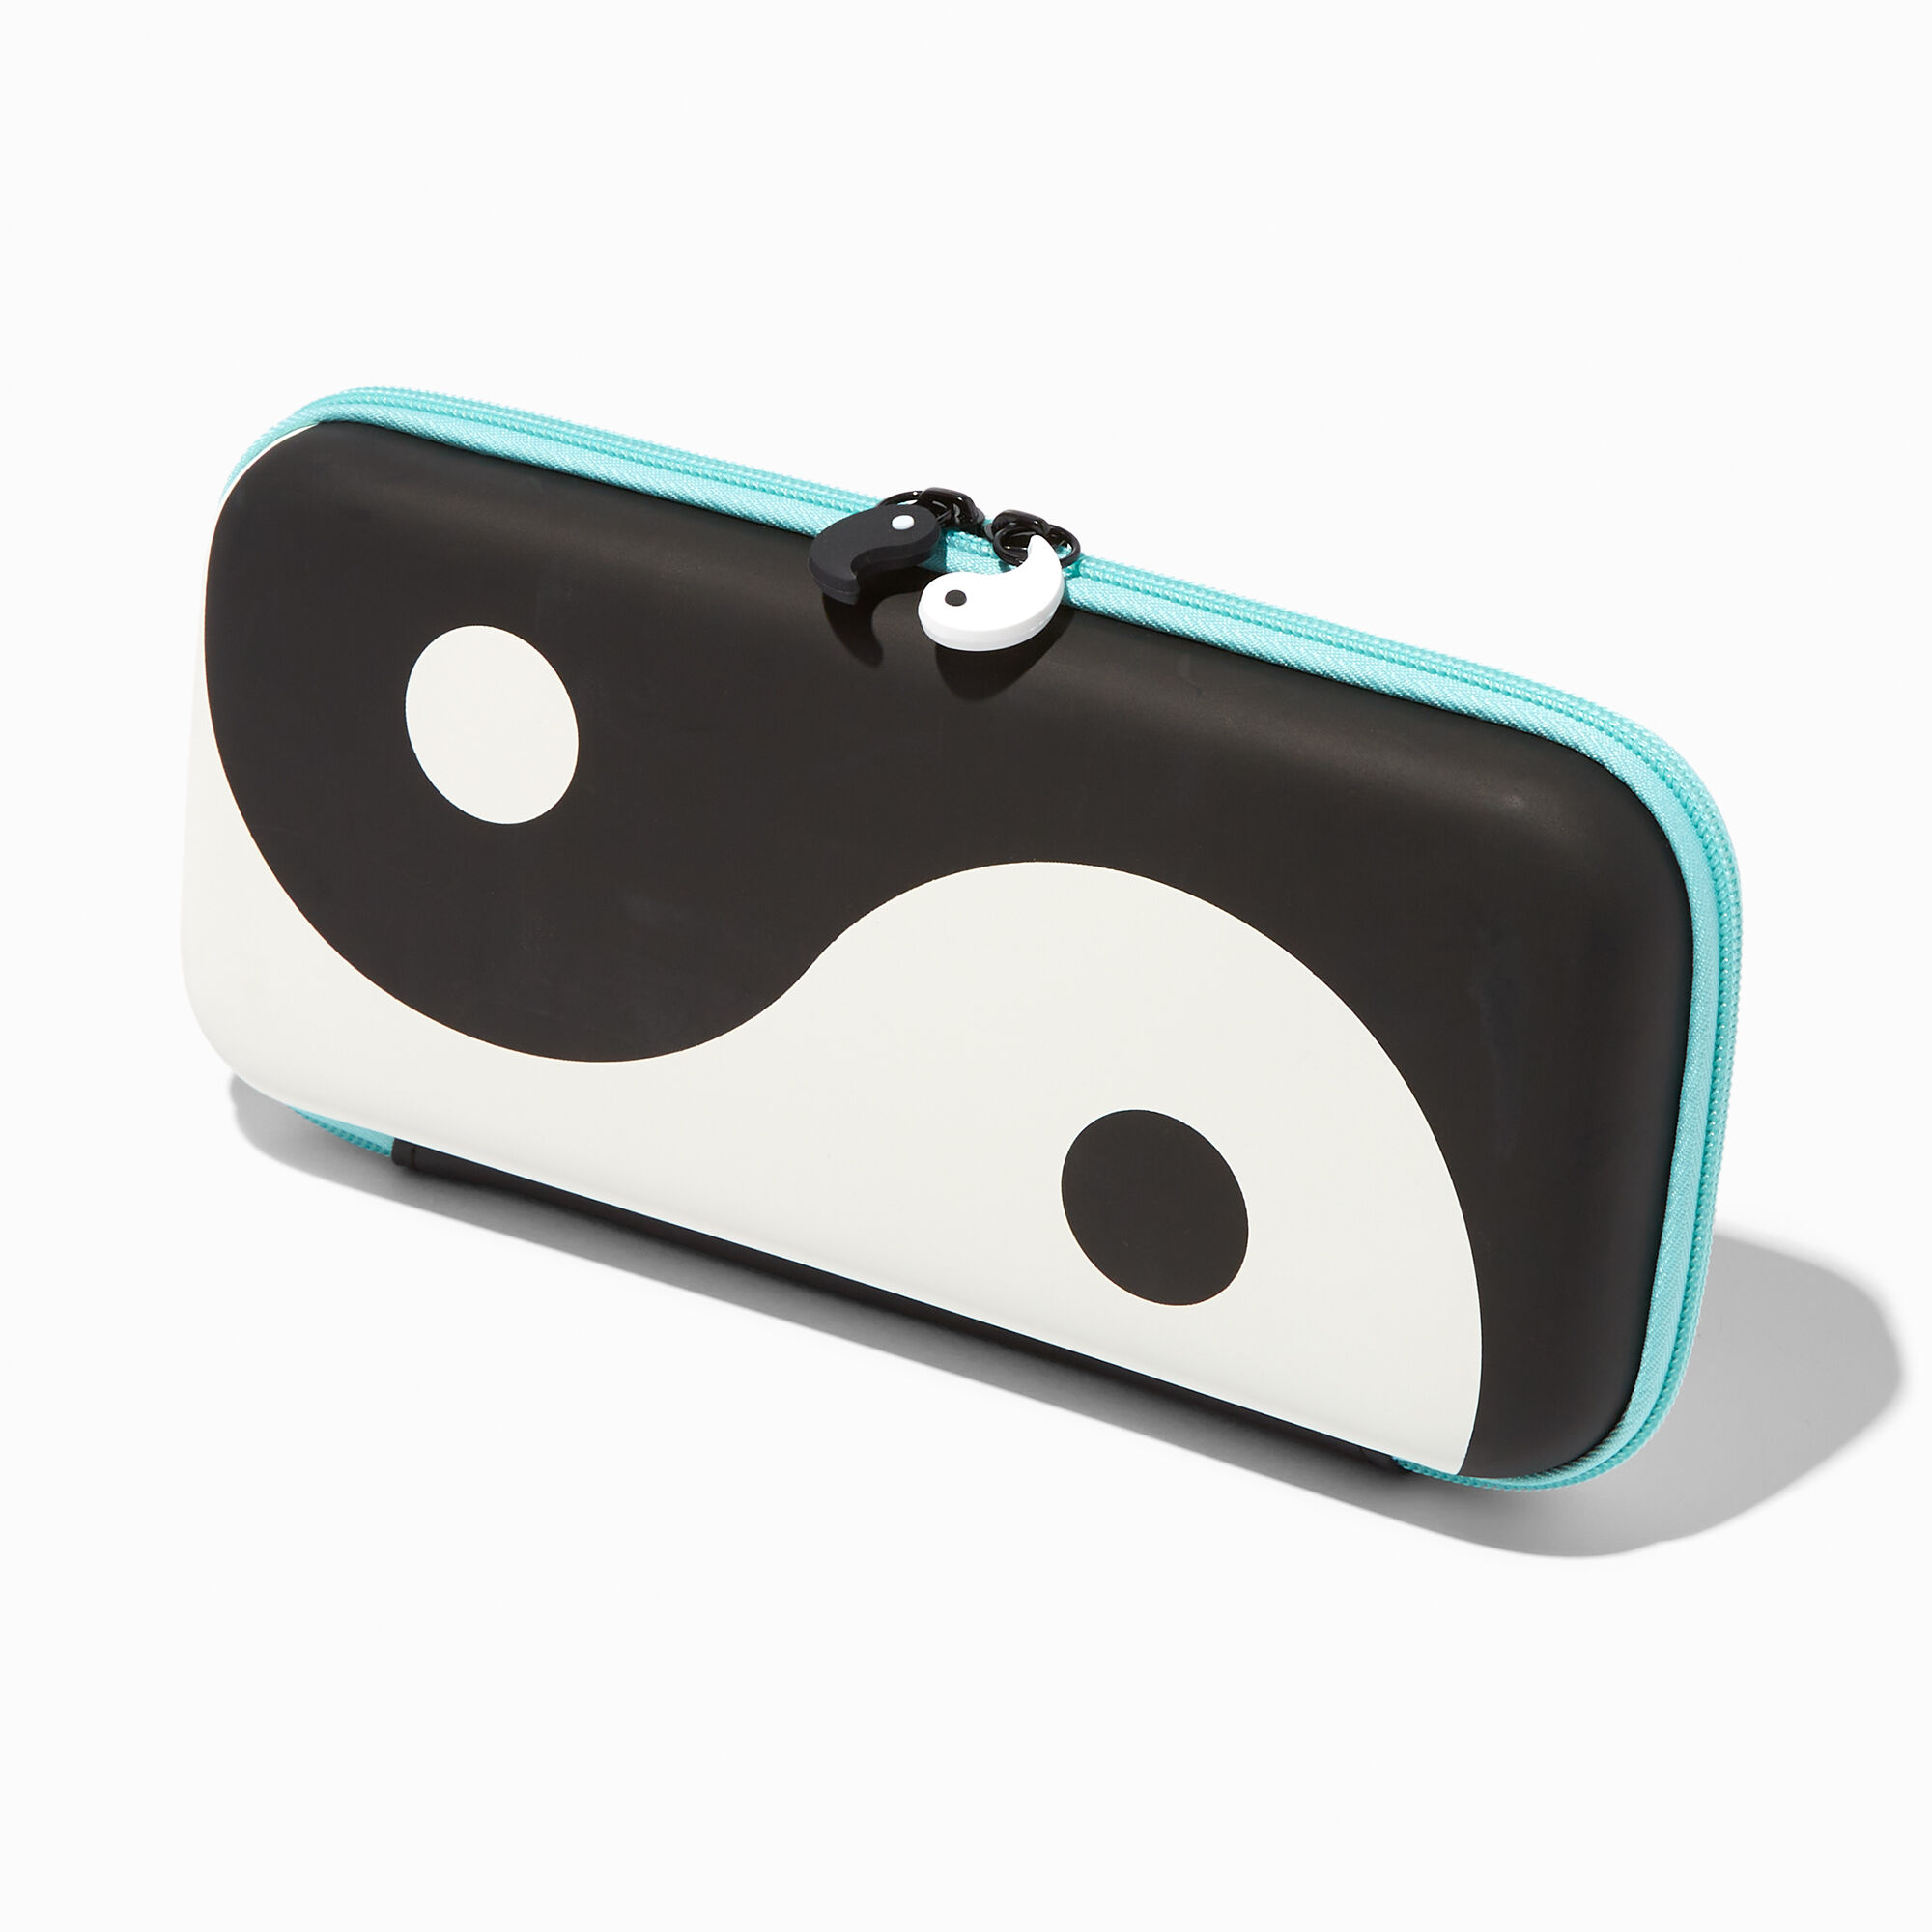 View Claires Yin Yang Protective Tech Case Fits Nintendo Switch information